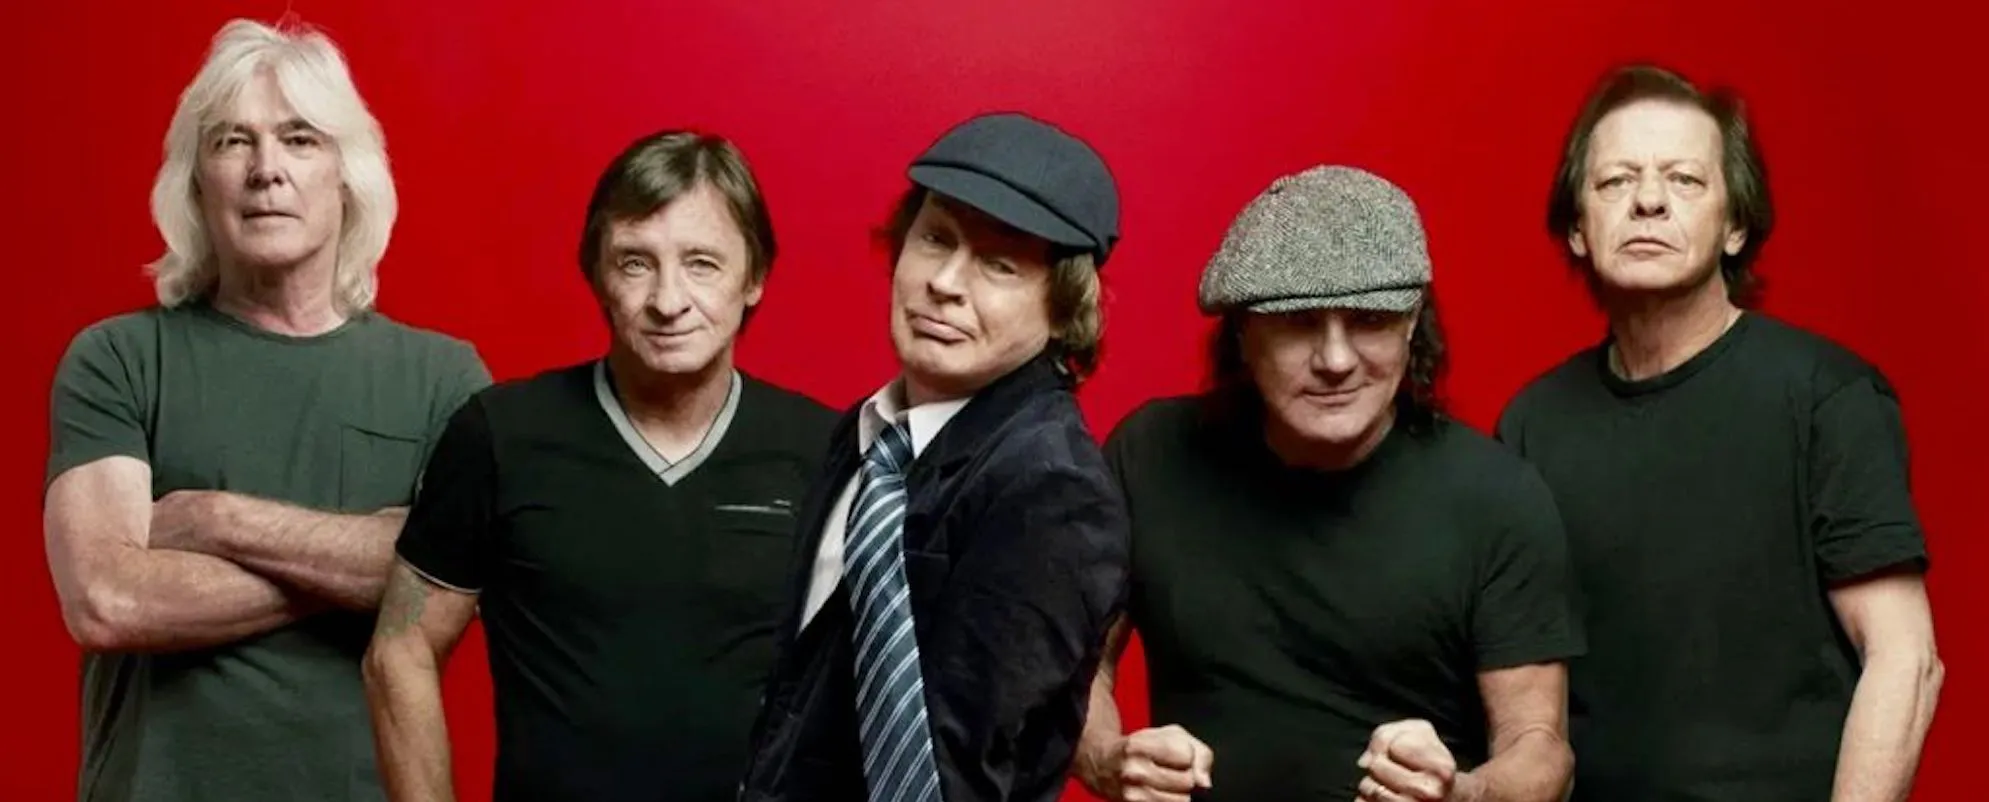 Behind the Meaning of “You Shook Me All Night Long” by AC/DC